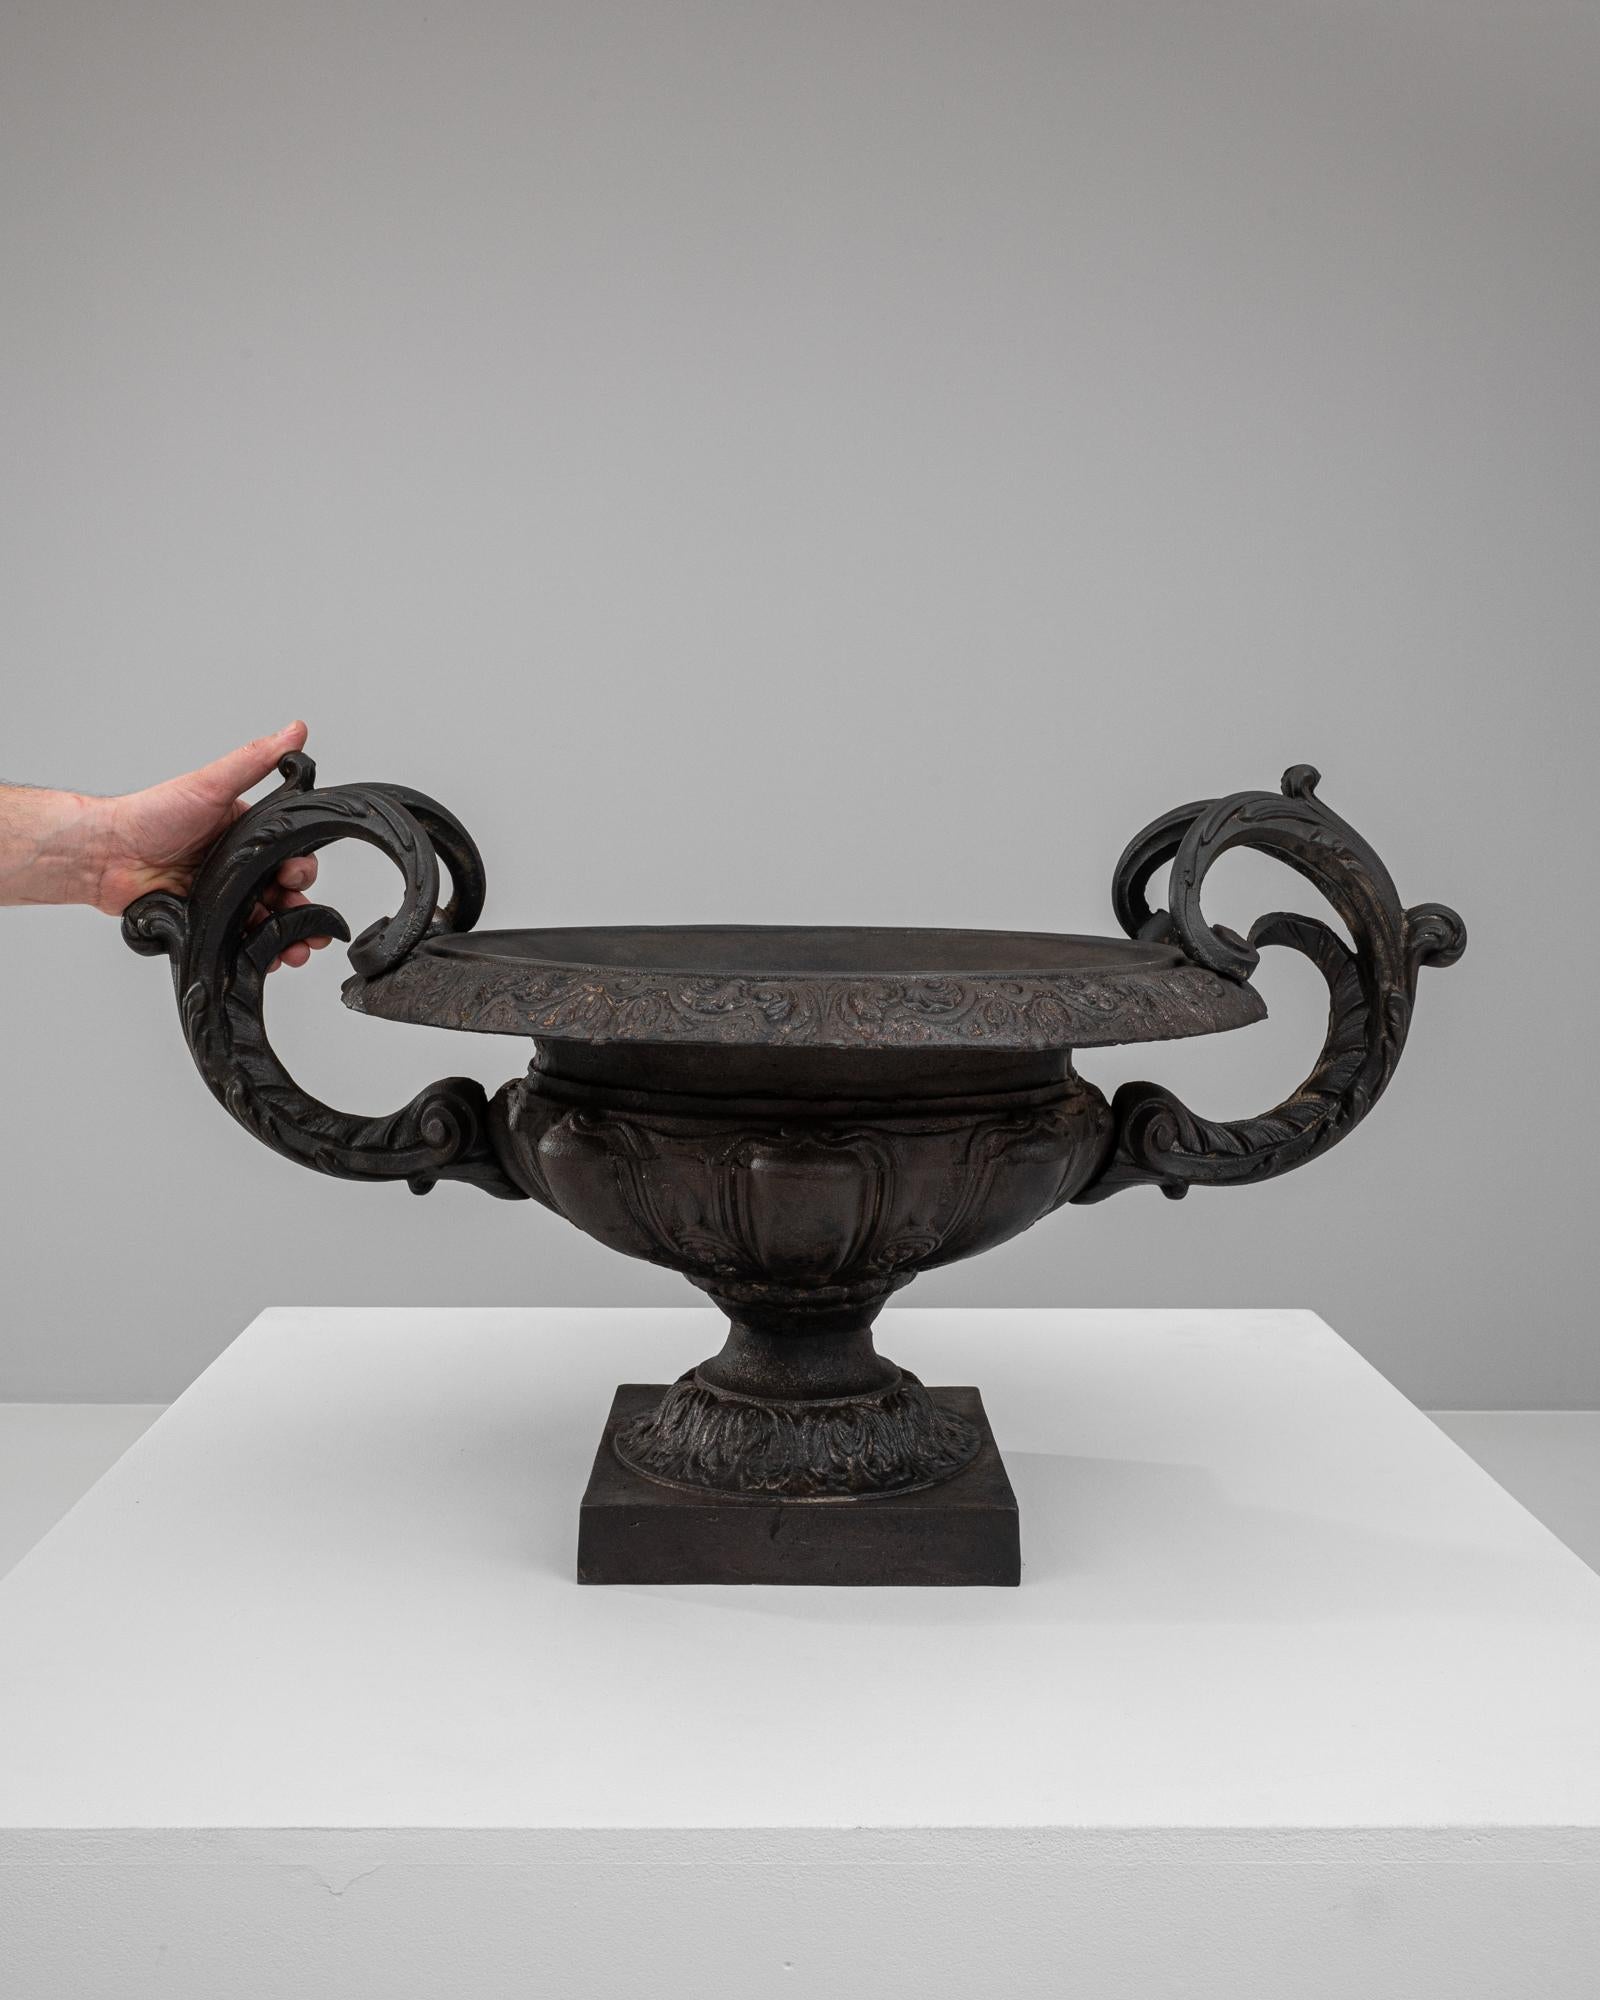 This 19th Century French Cast Iron Planter is a masterpiece of decorative art, infusing aristocratic elegance into any space it graces. Ornately carved with intricate patterns, the bowl of the planter sits majestically atop a fluted pedestal. It's